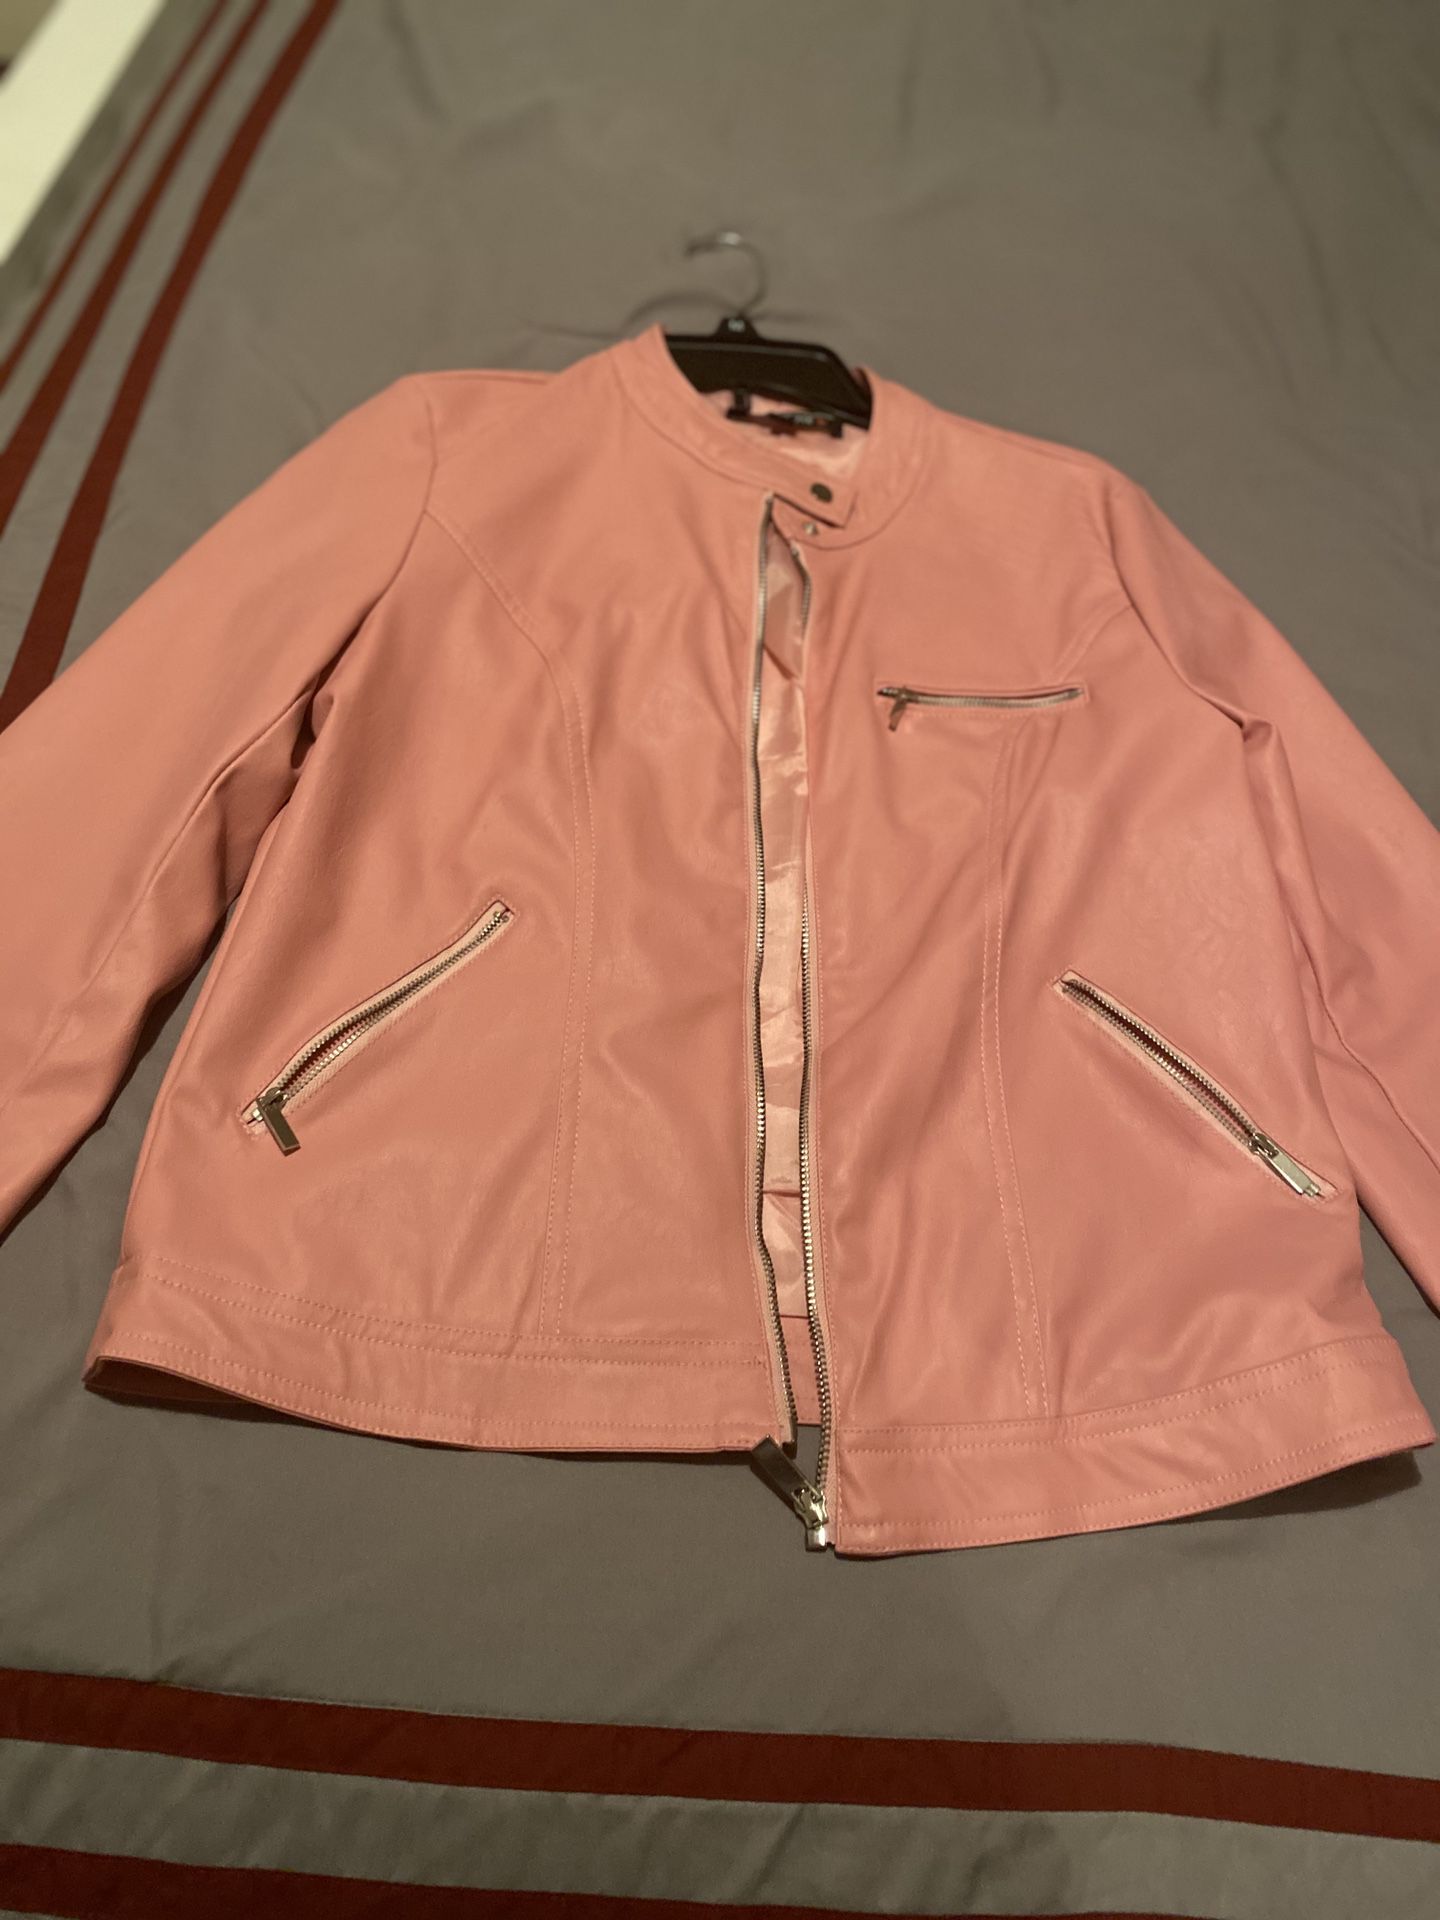 Faux leather pink jacket ladies size small